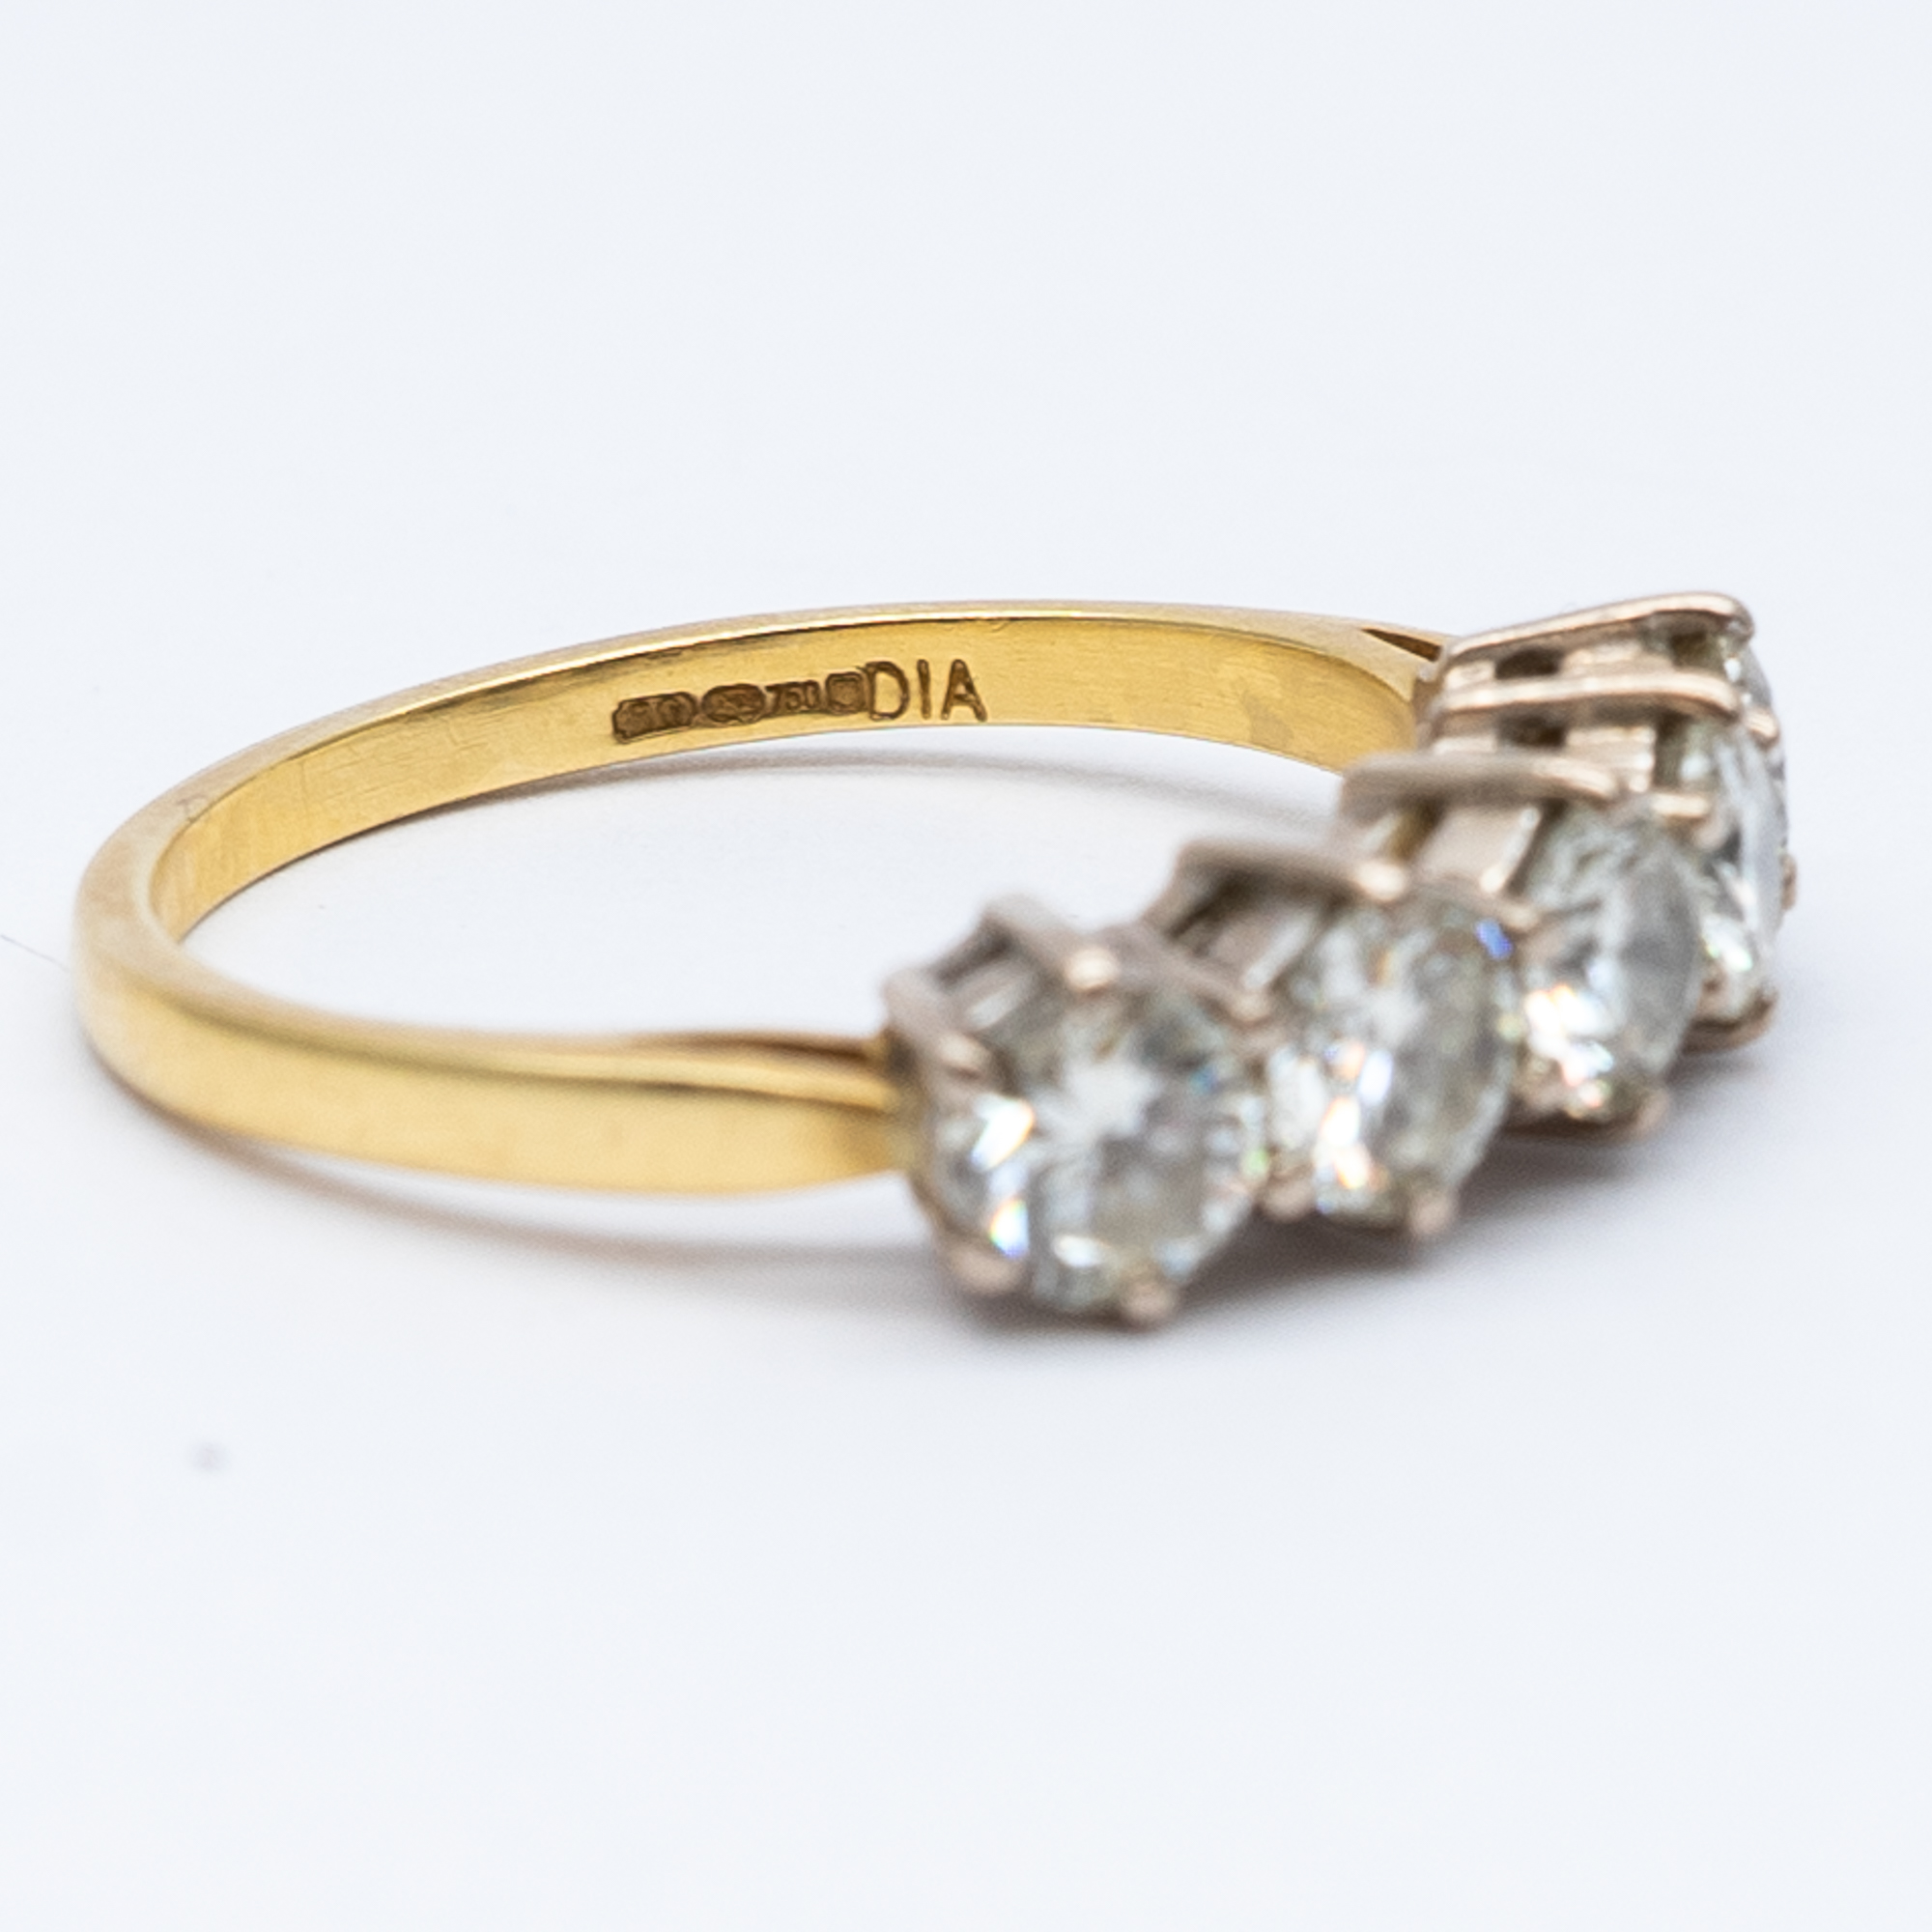 An 18ct yellow gold 5 stone diamond eternity ring - Image 2 of 7